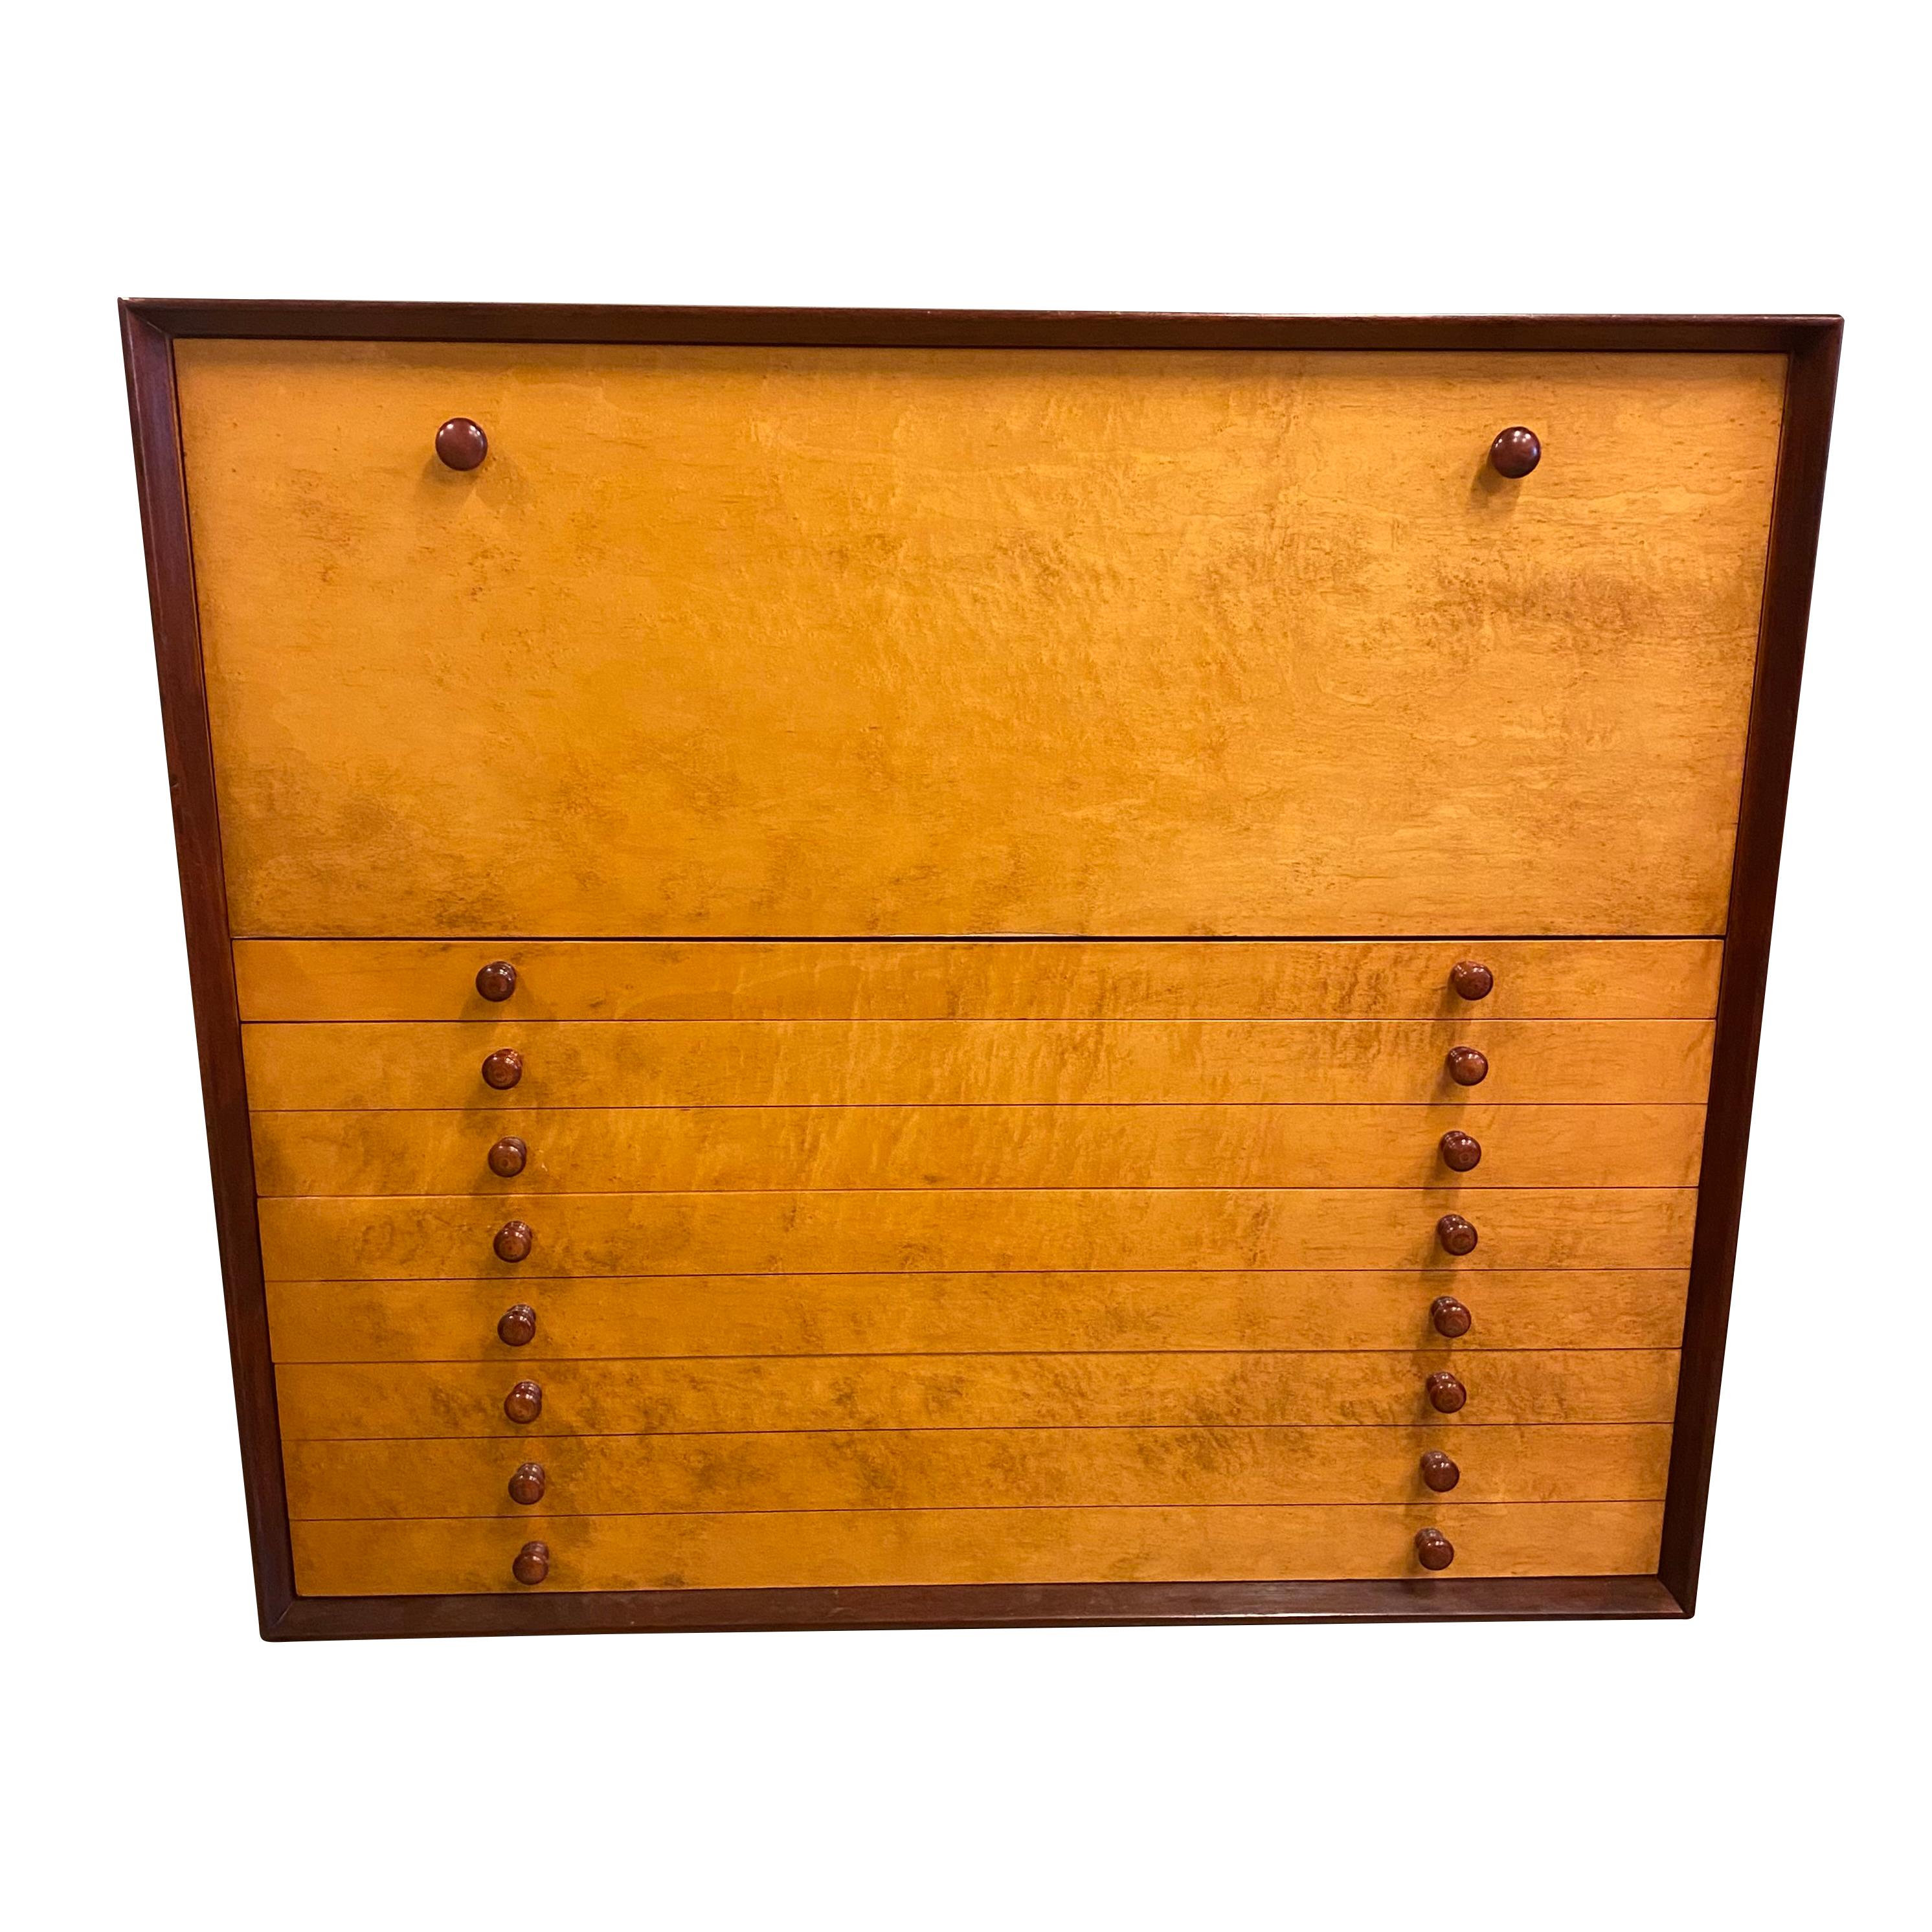 Edward Wormley style Mid-Century Modern case piece with drawers at base and drop-down secretary at top. Two toned finish that appears to be rosewood and burled maple. Interior of desk is fitted with multiple small drawers and cubbies, like an